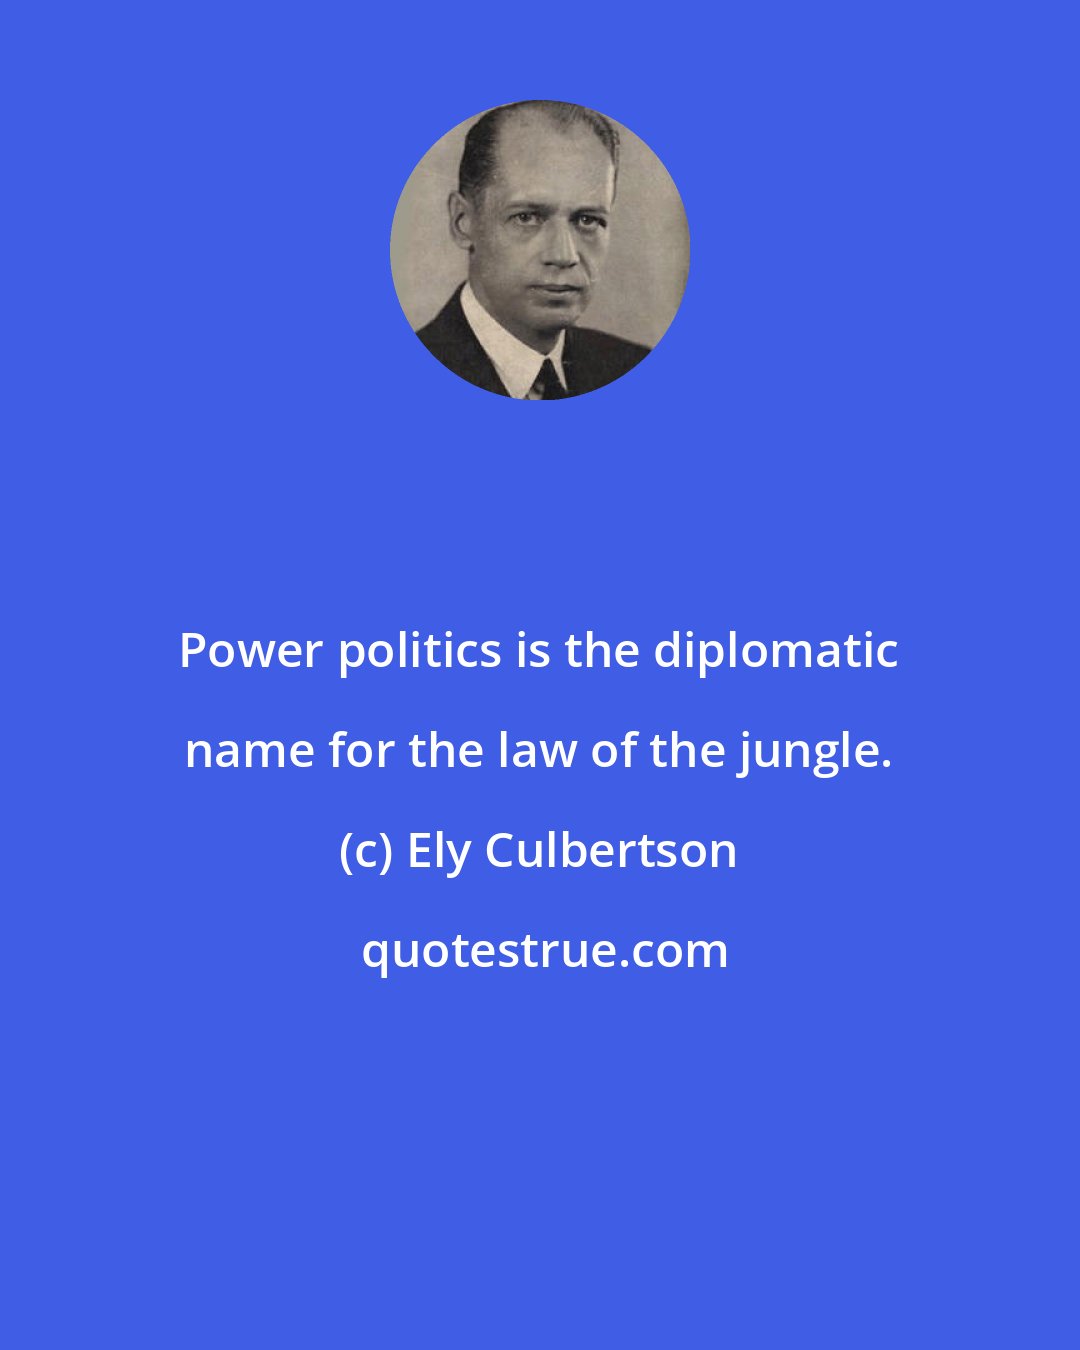 Ely Culbertson: Power politics is the diplomatic name for the law of the jungle.